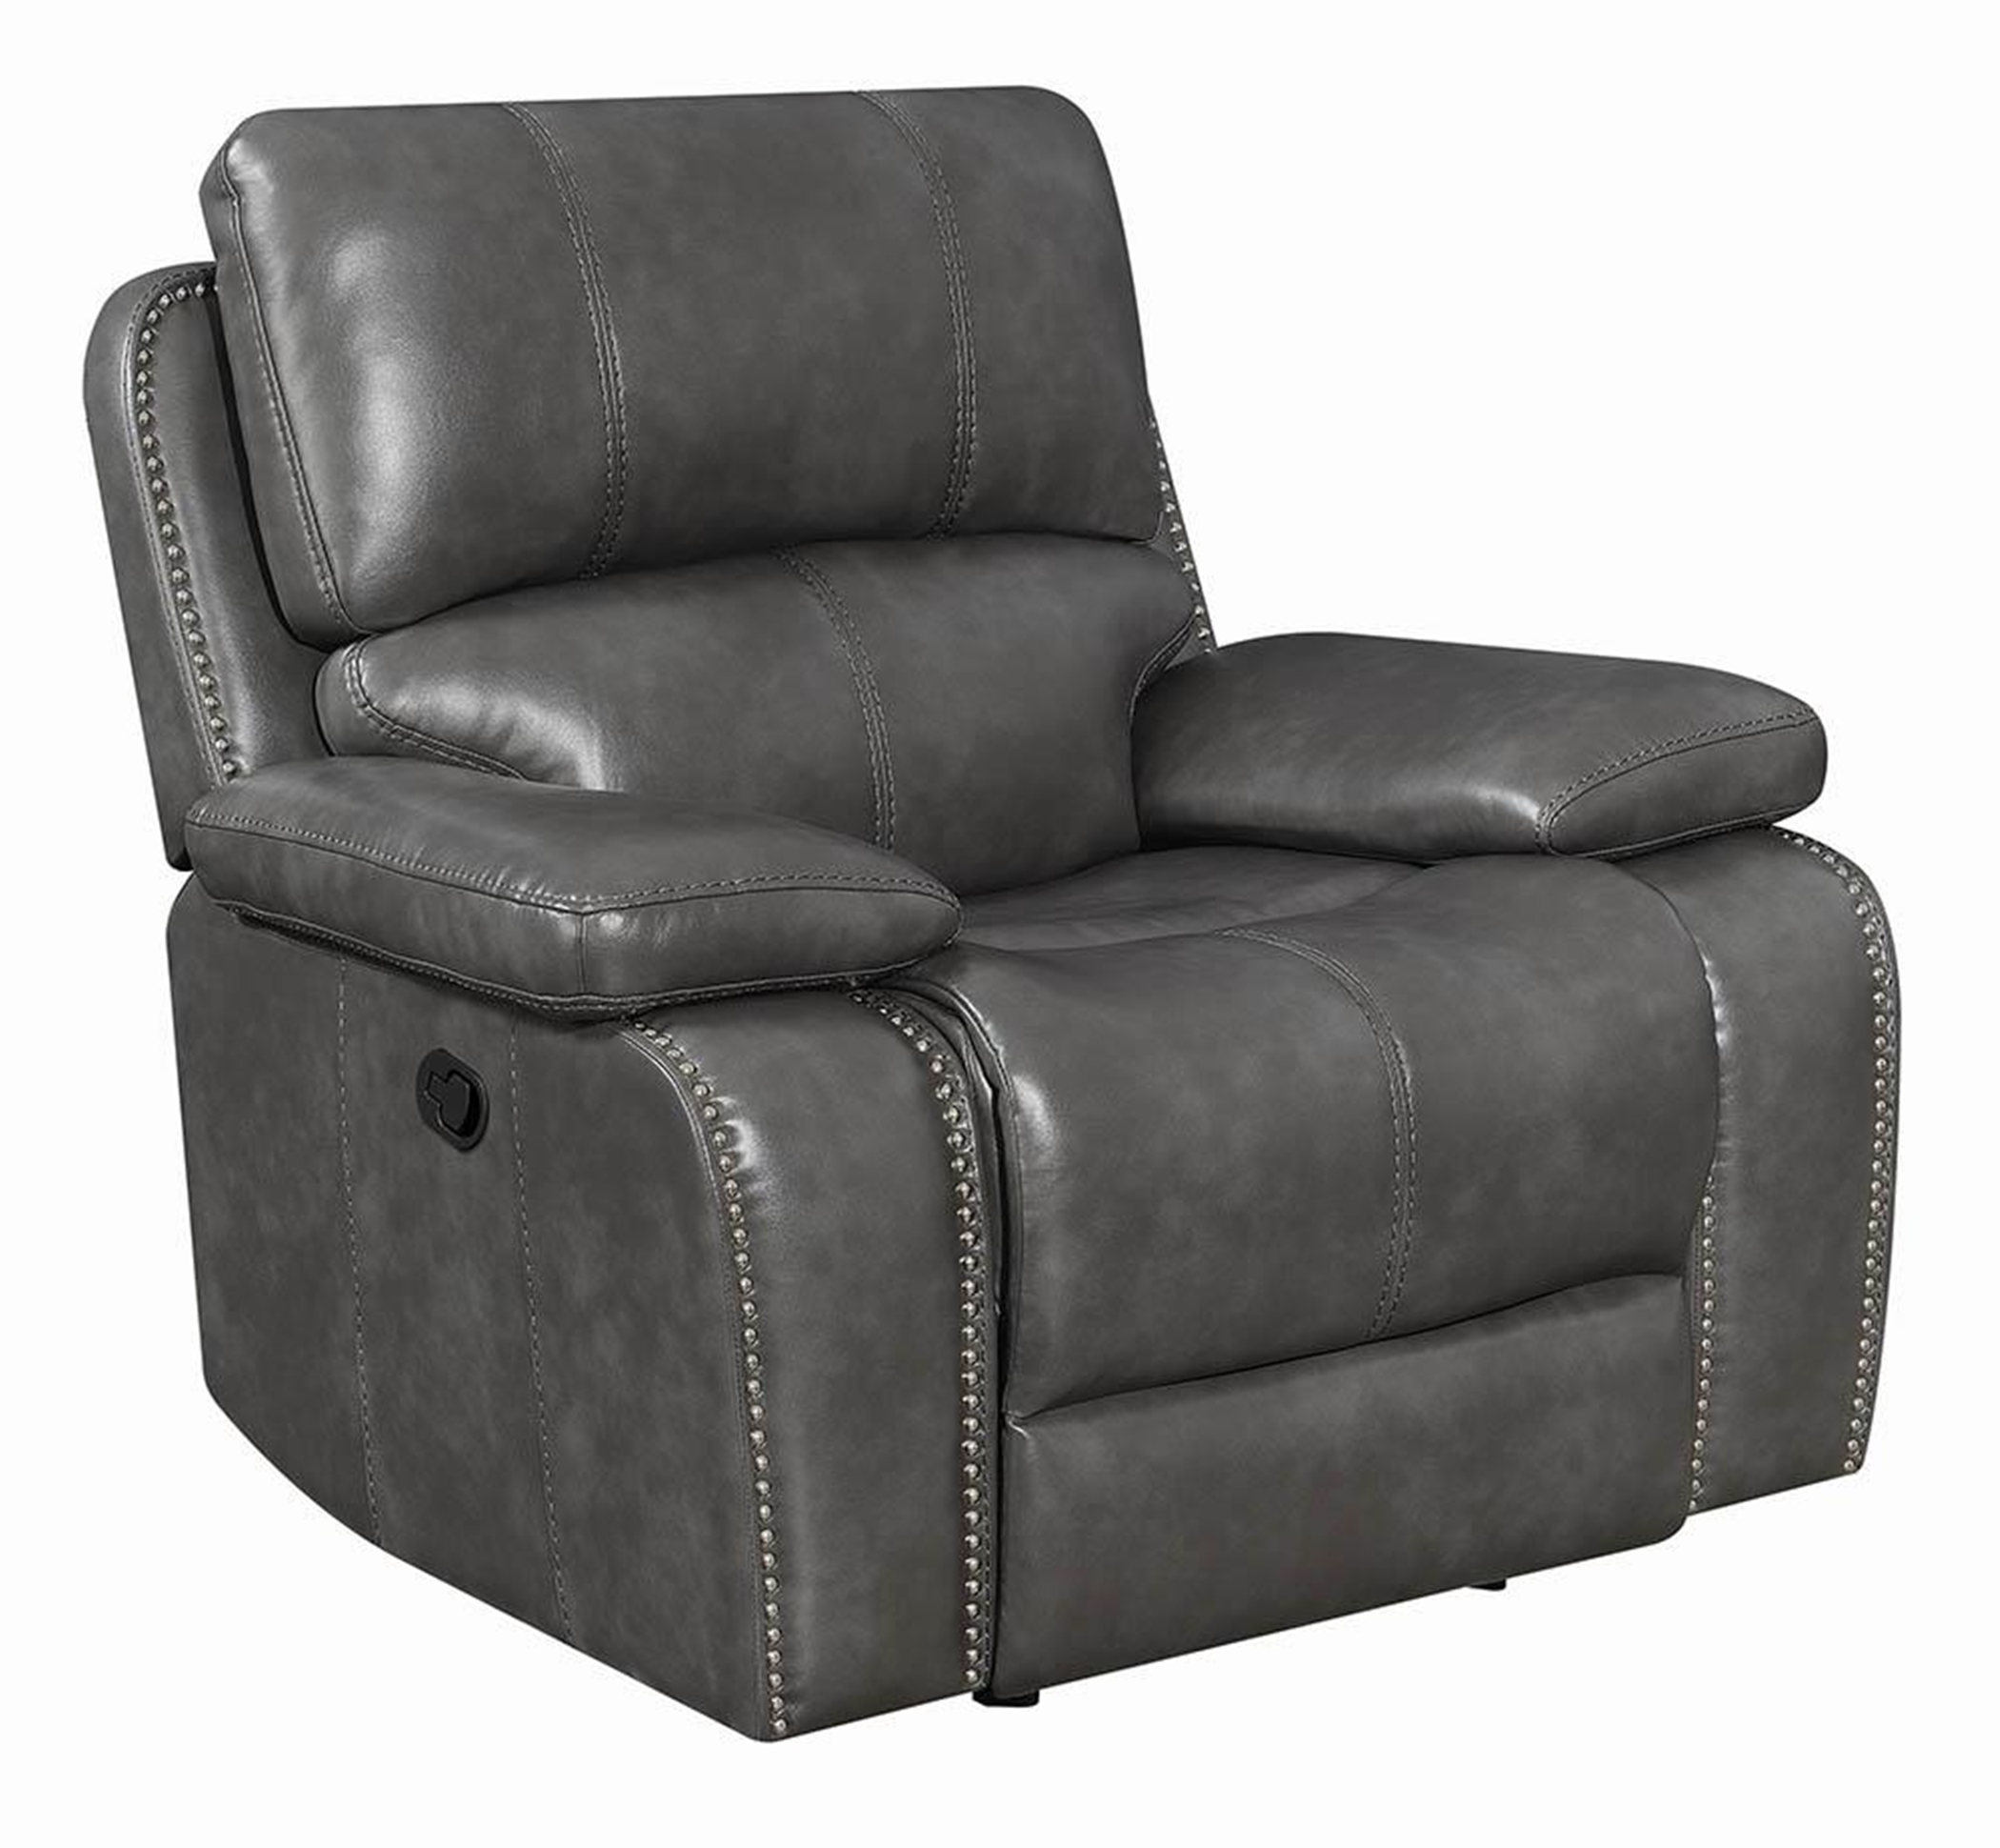 Ravenna Charcoal Motion Glider Recliner - Click Image to Close